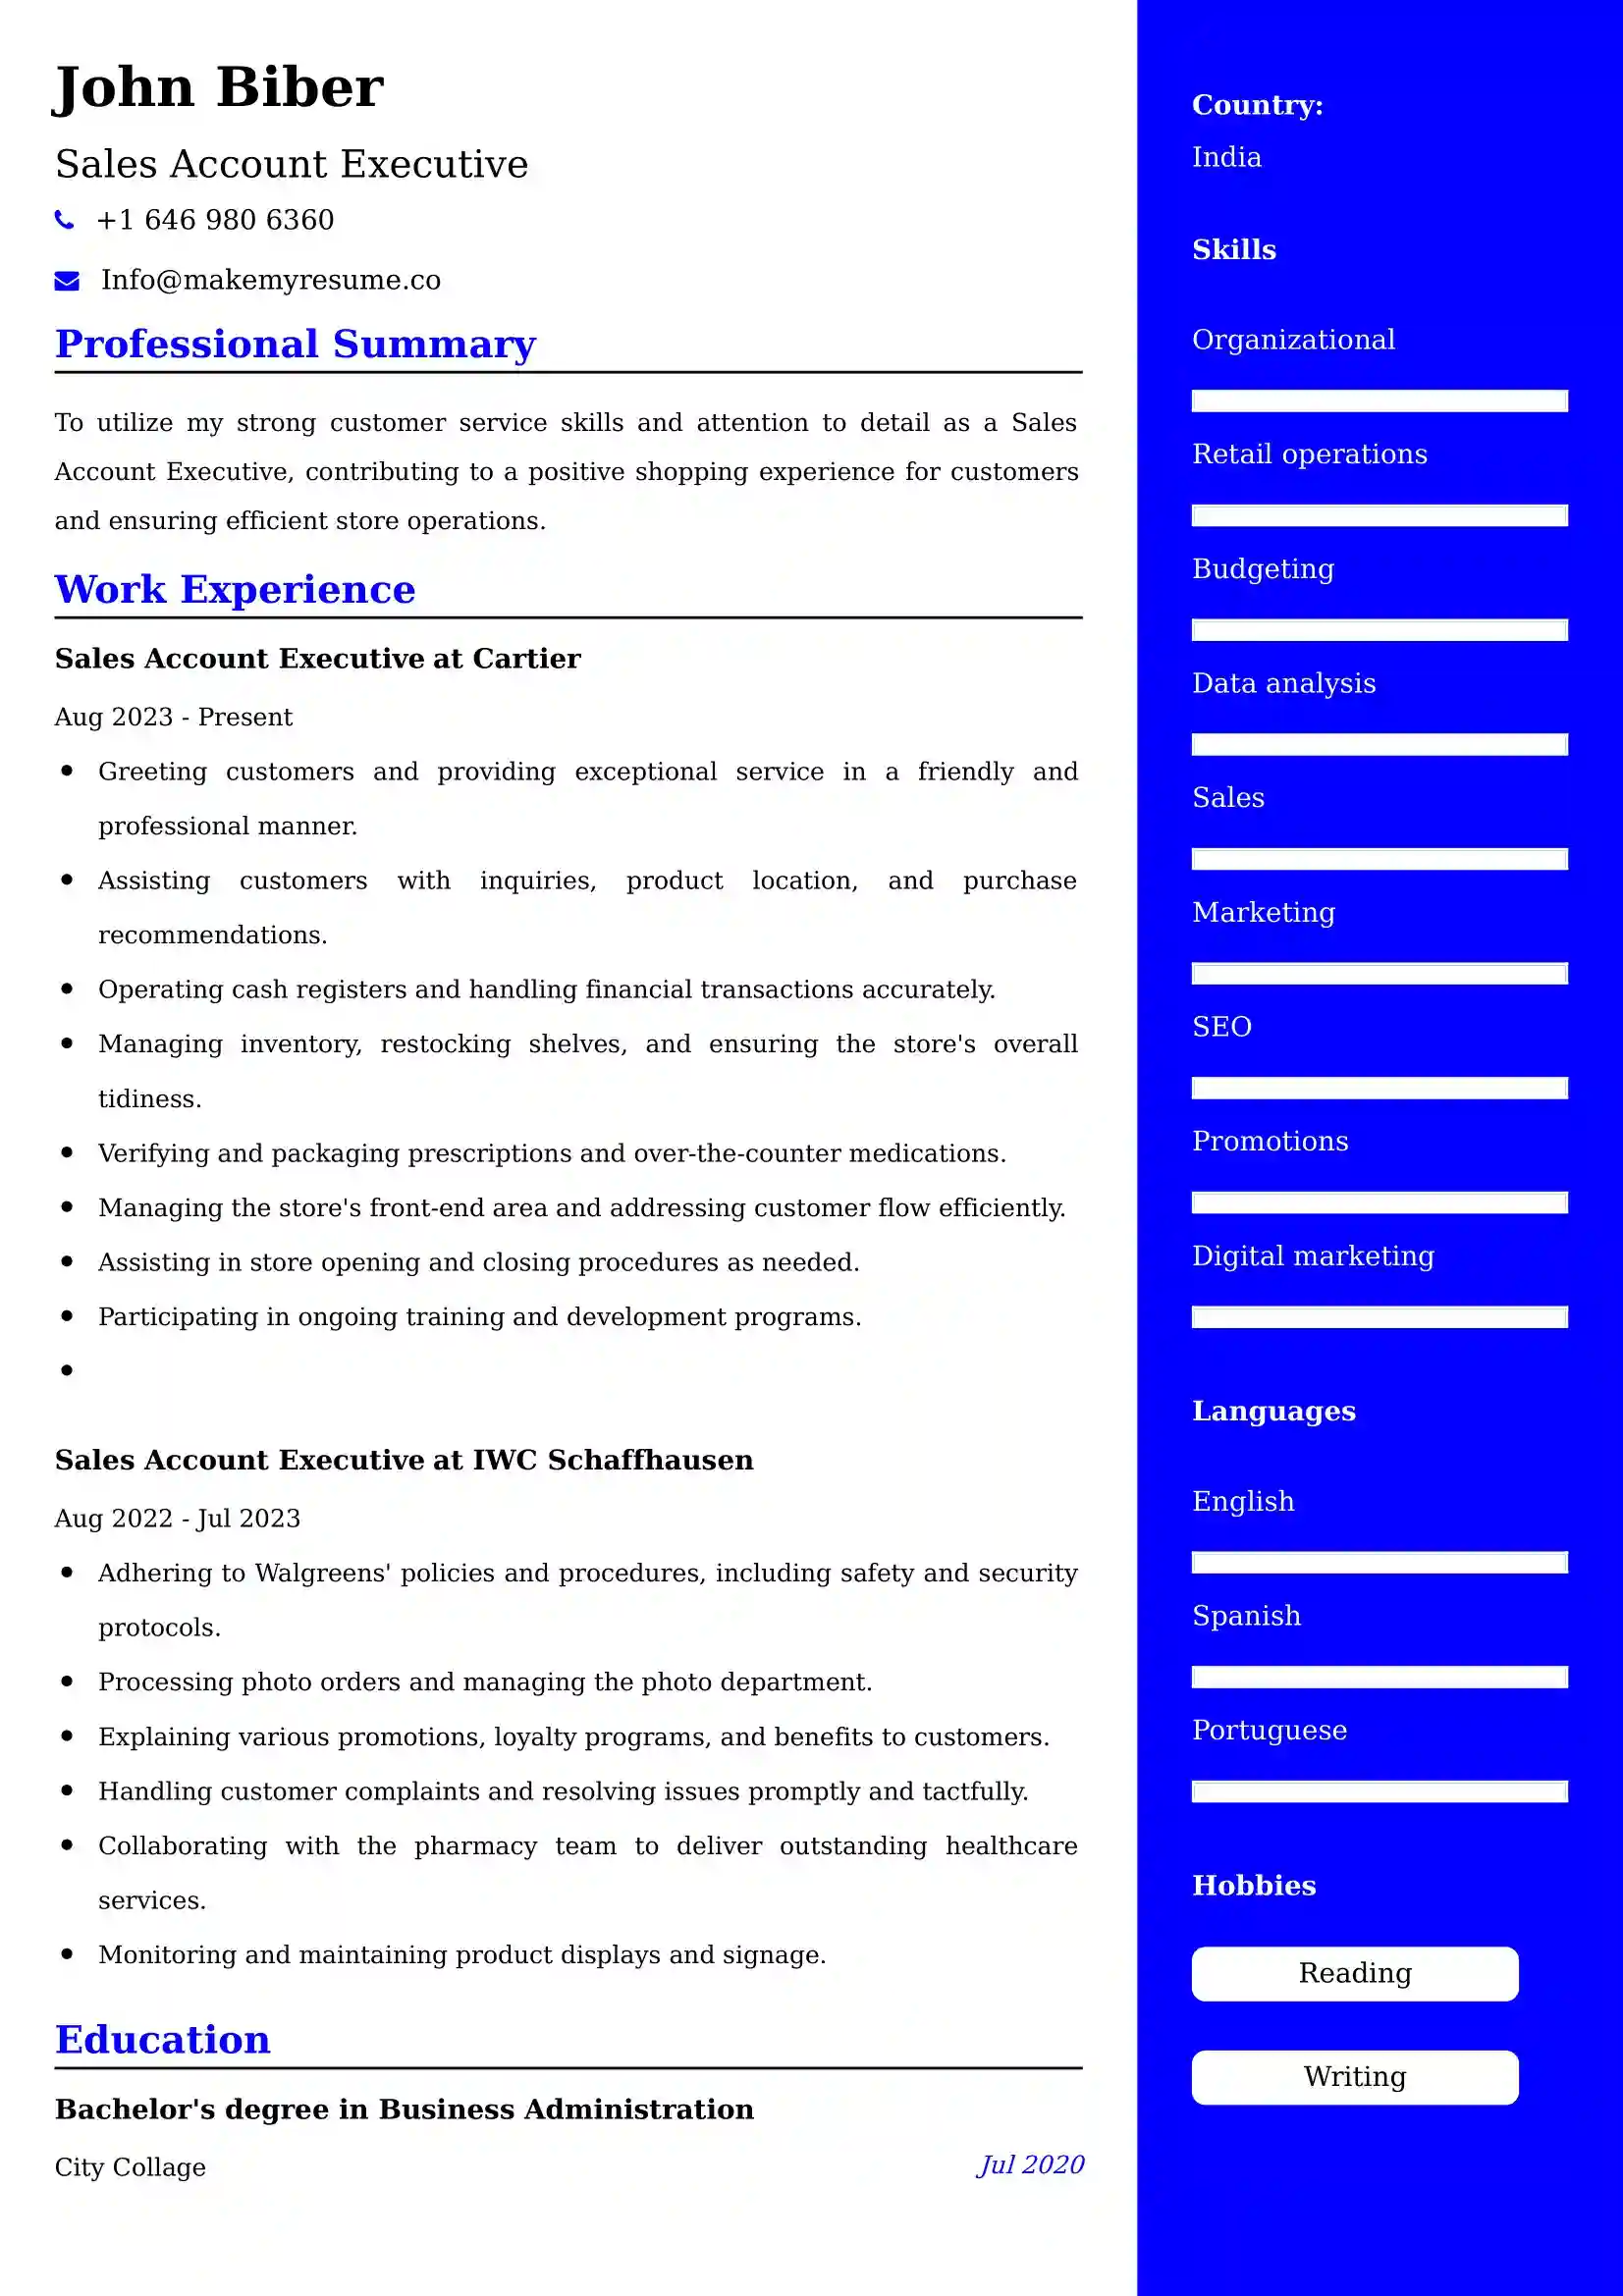 Best Sales Account Executive Resume Examples for UK